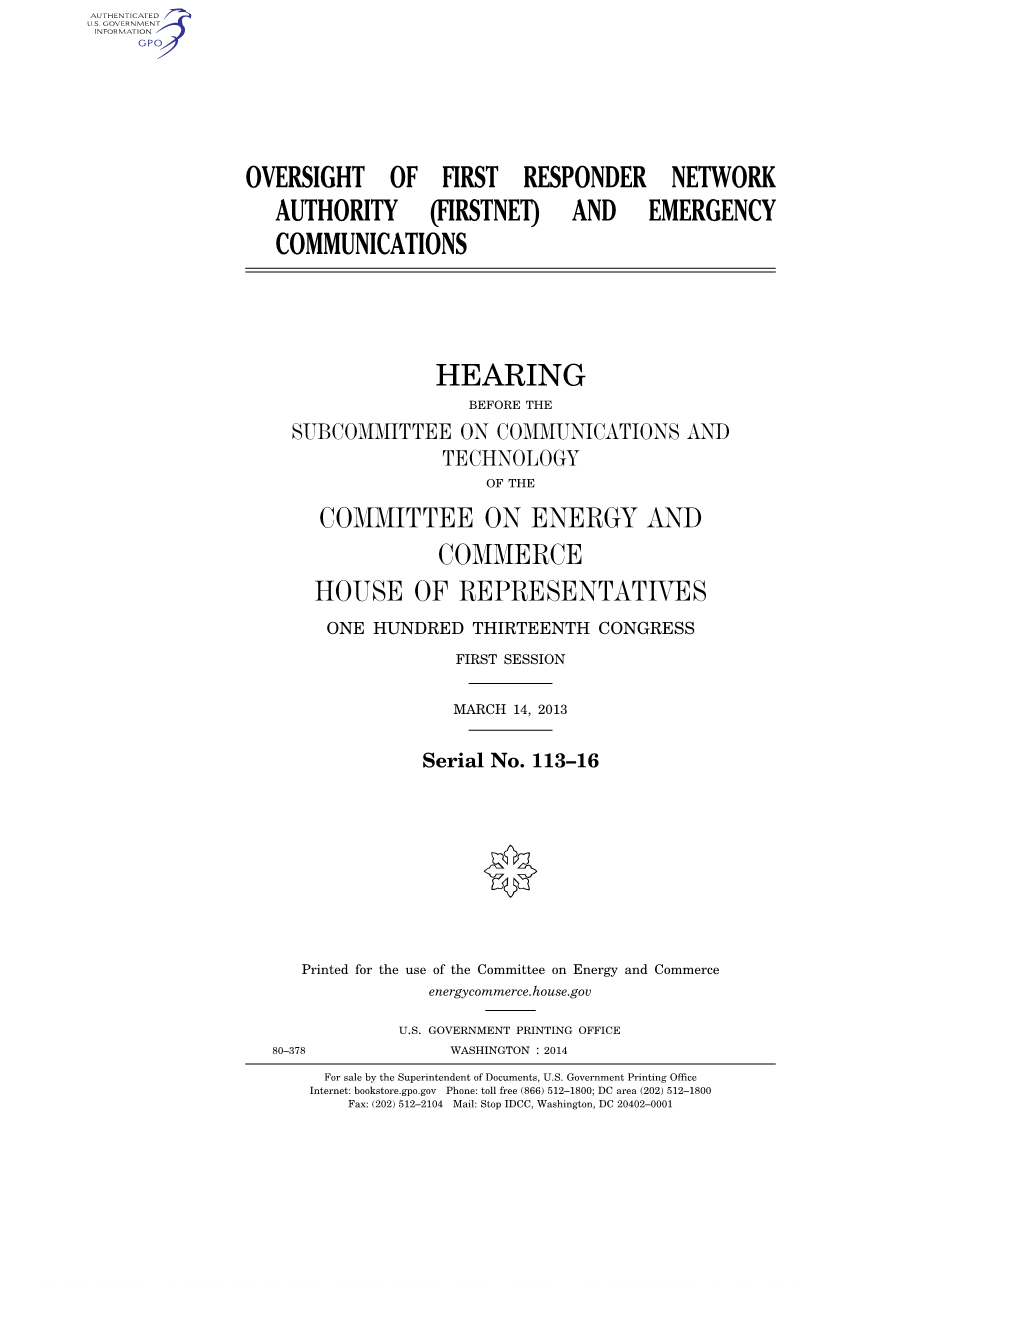 Oversight of First Responder Network Authority (Firstnet) and Emergency Communications Hearing Committee on Energy and Commerce